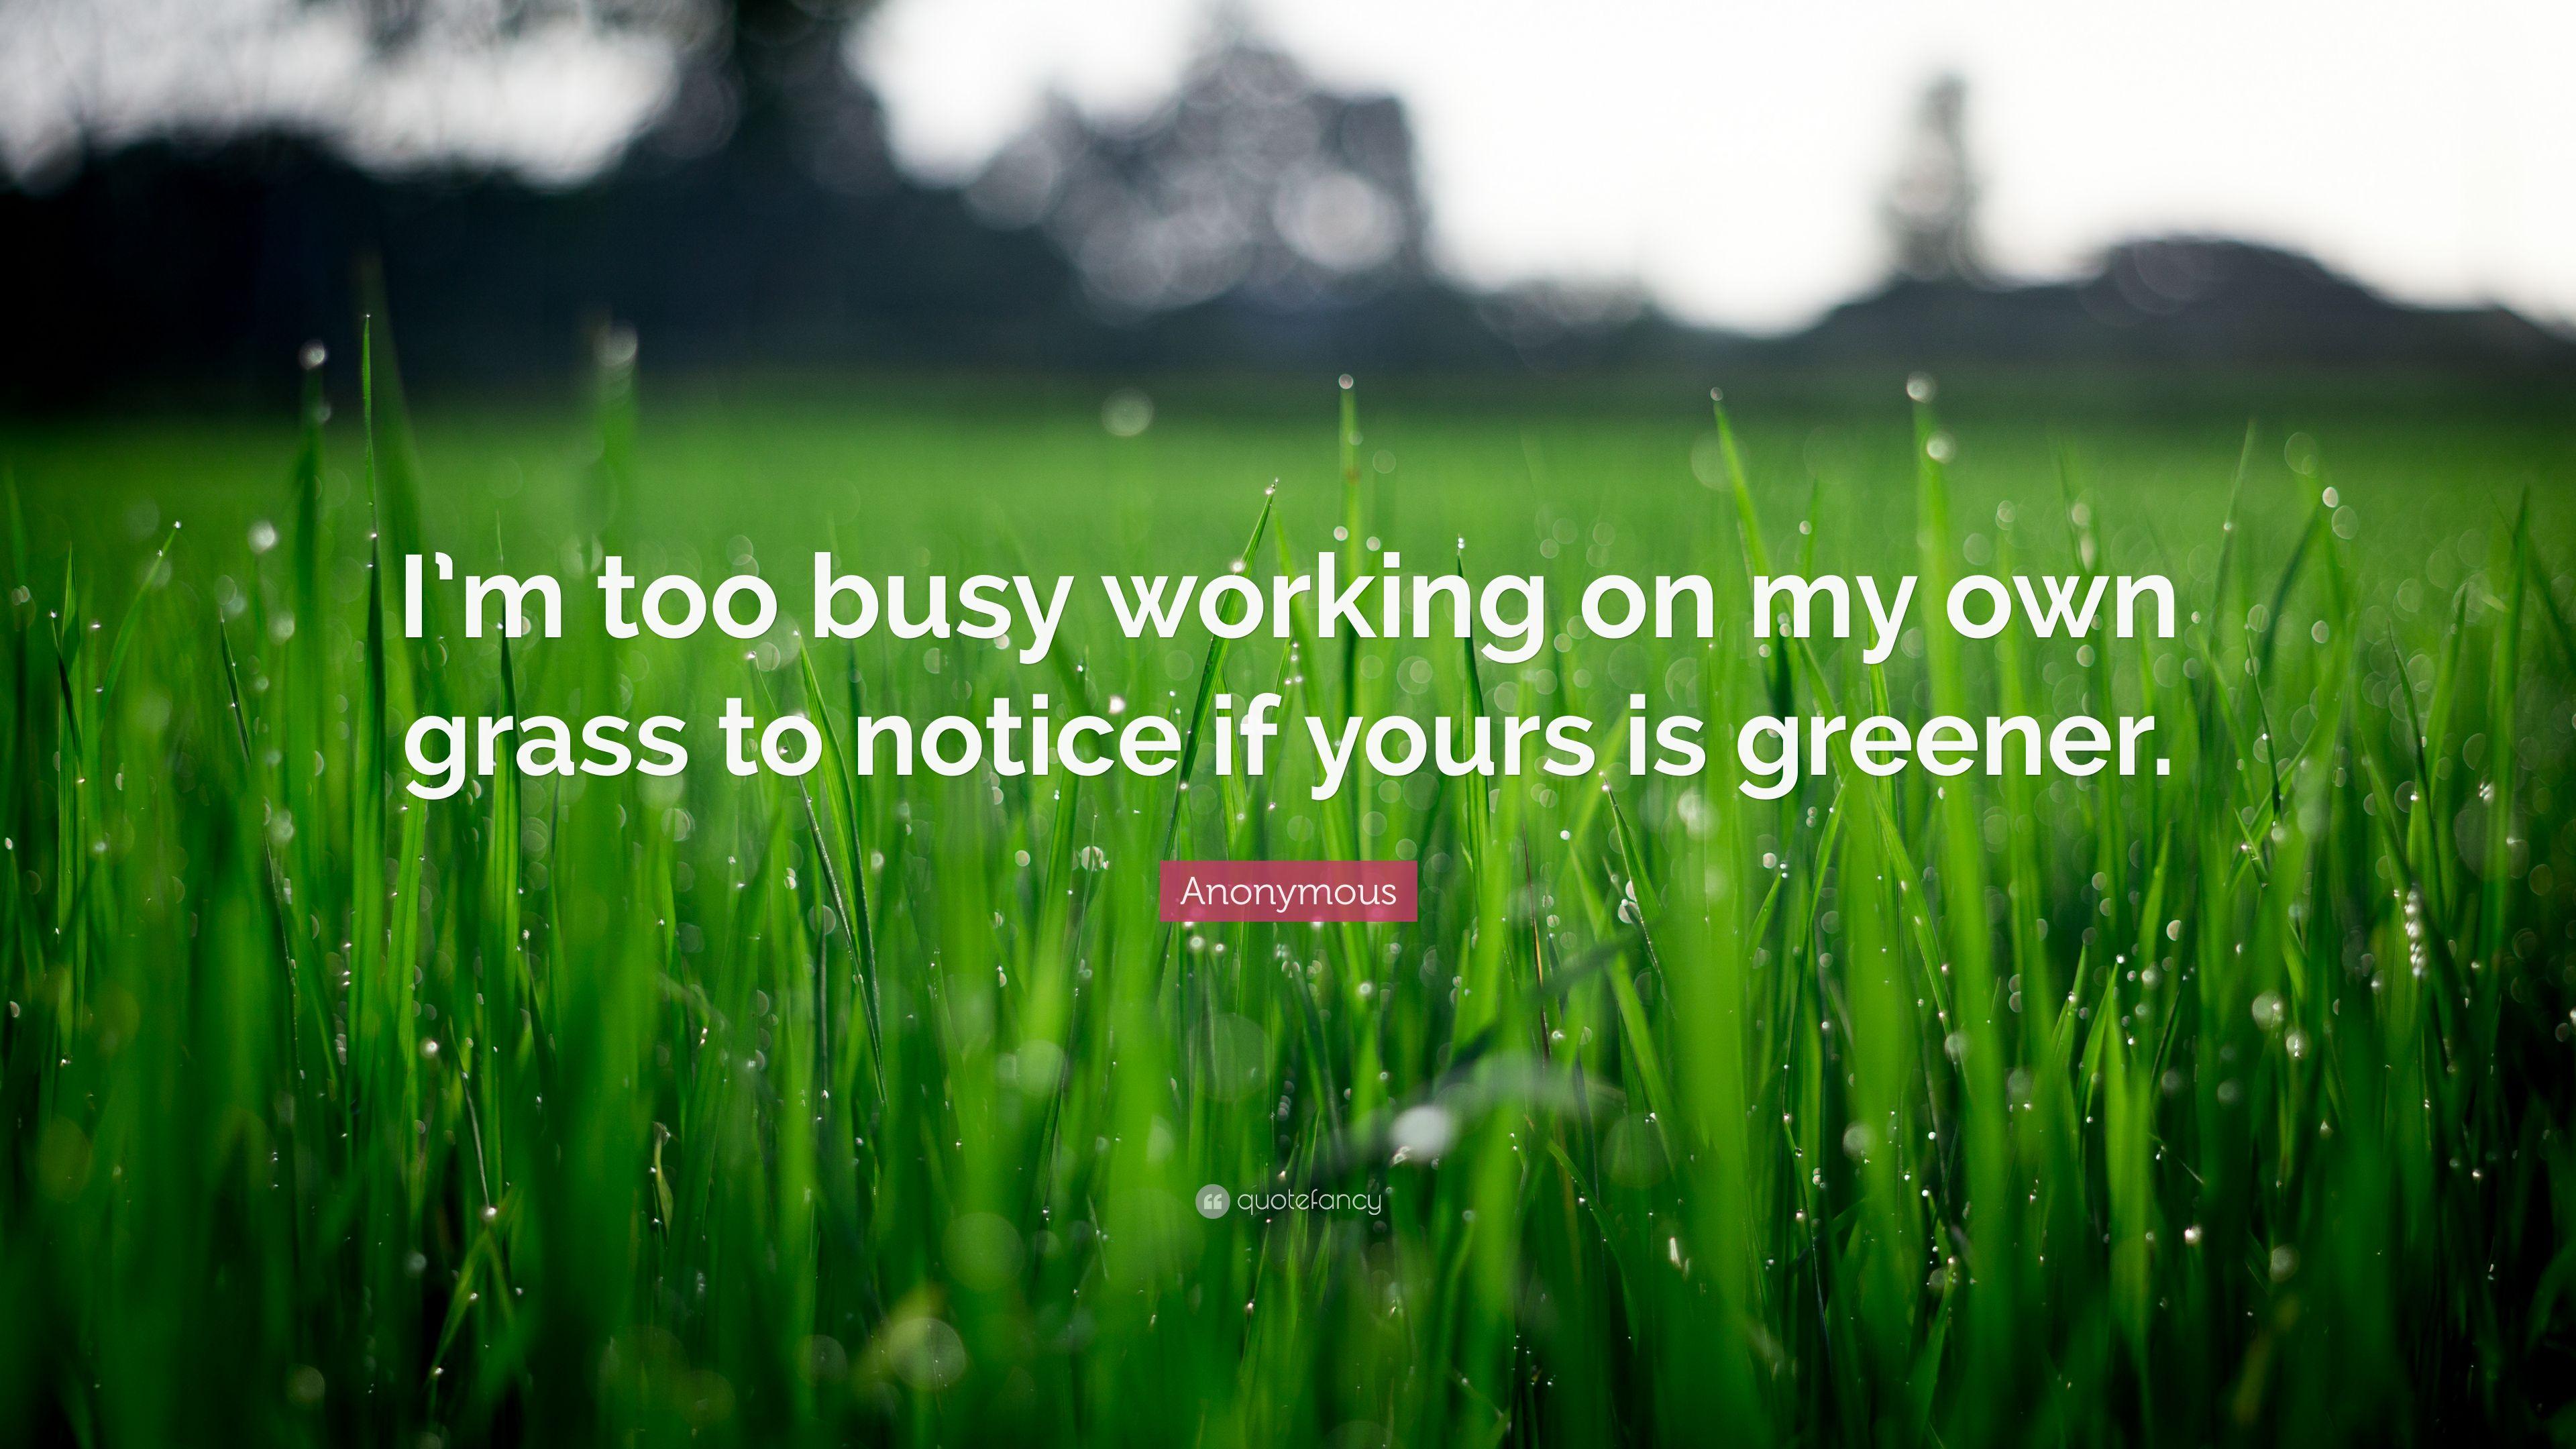 Anonymous Quote: “I'm too busy working on my own grass to notice